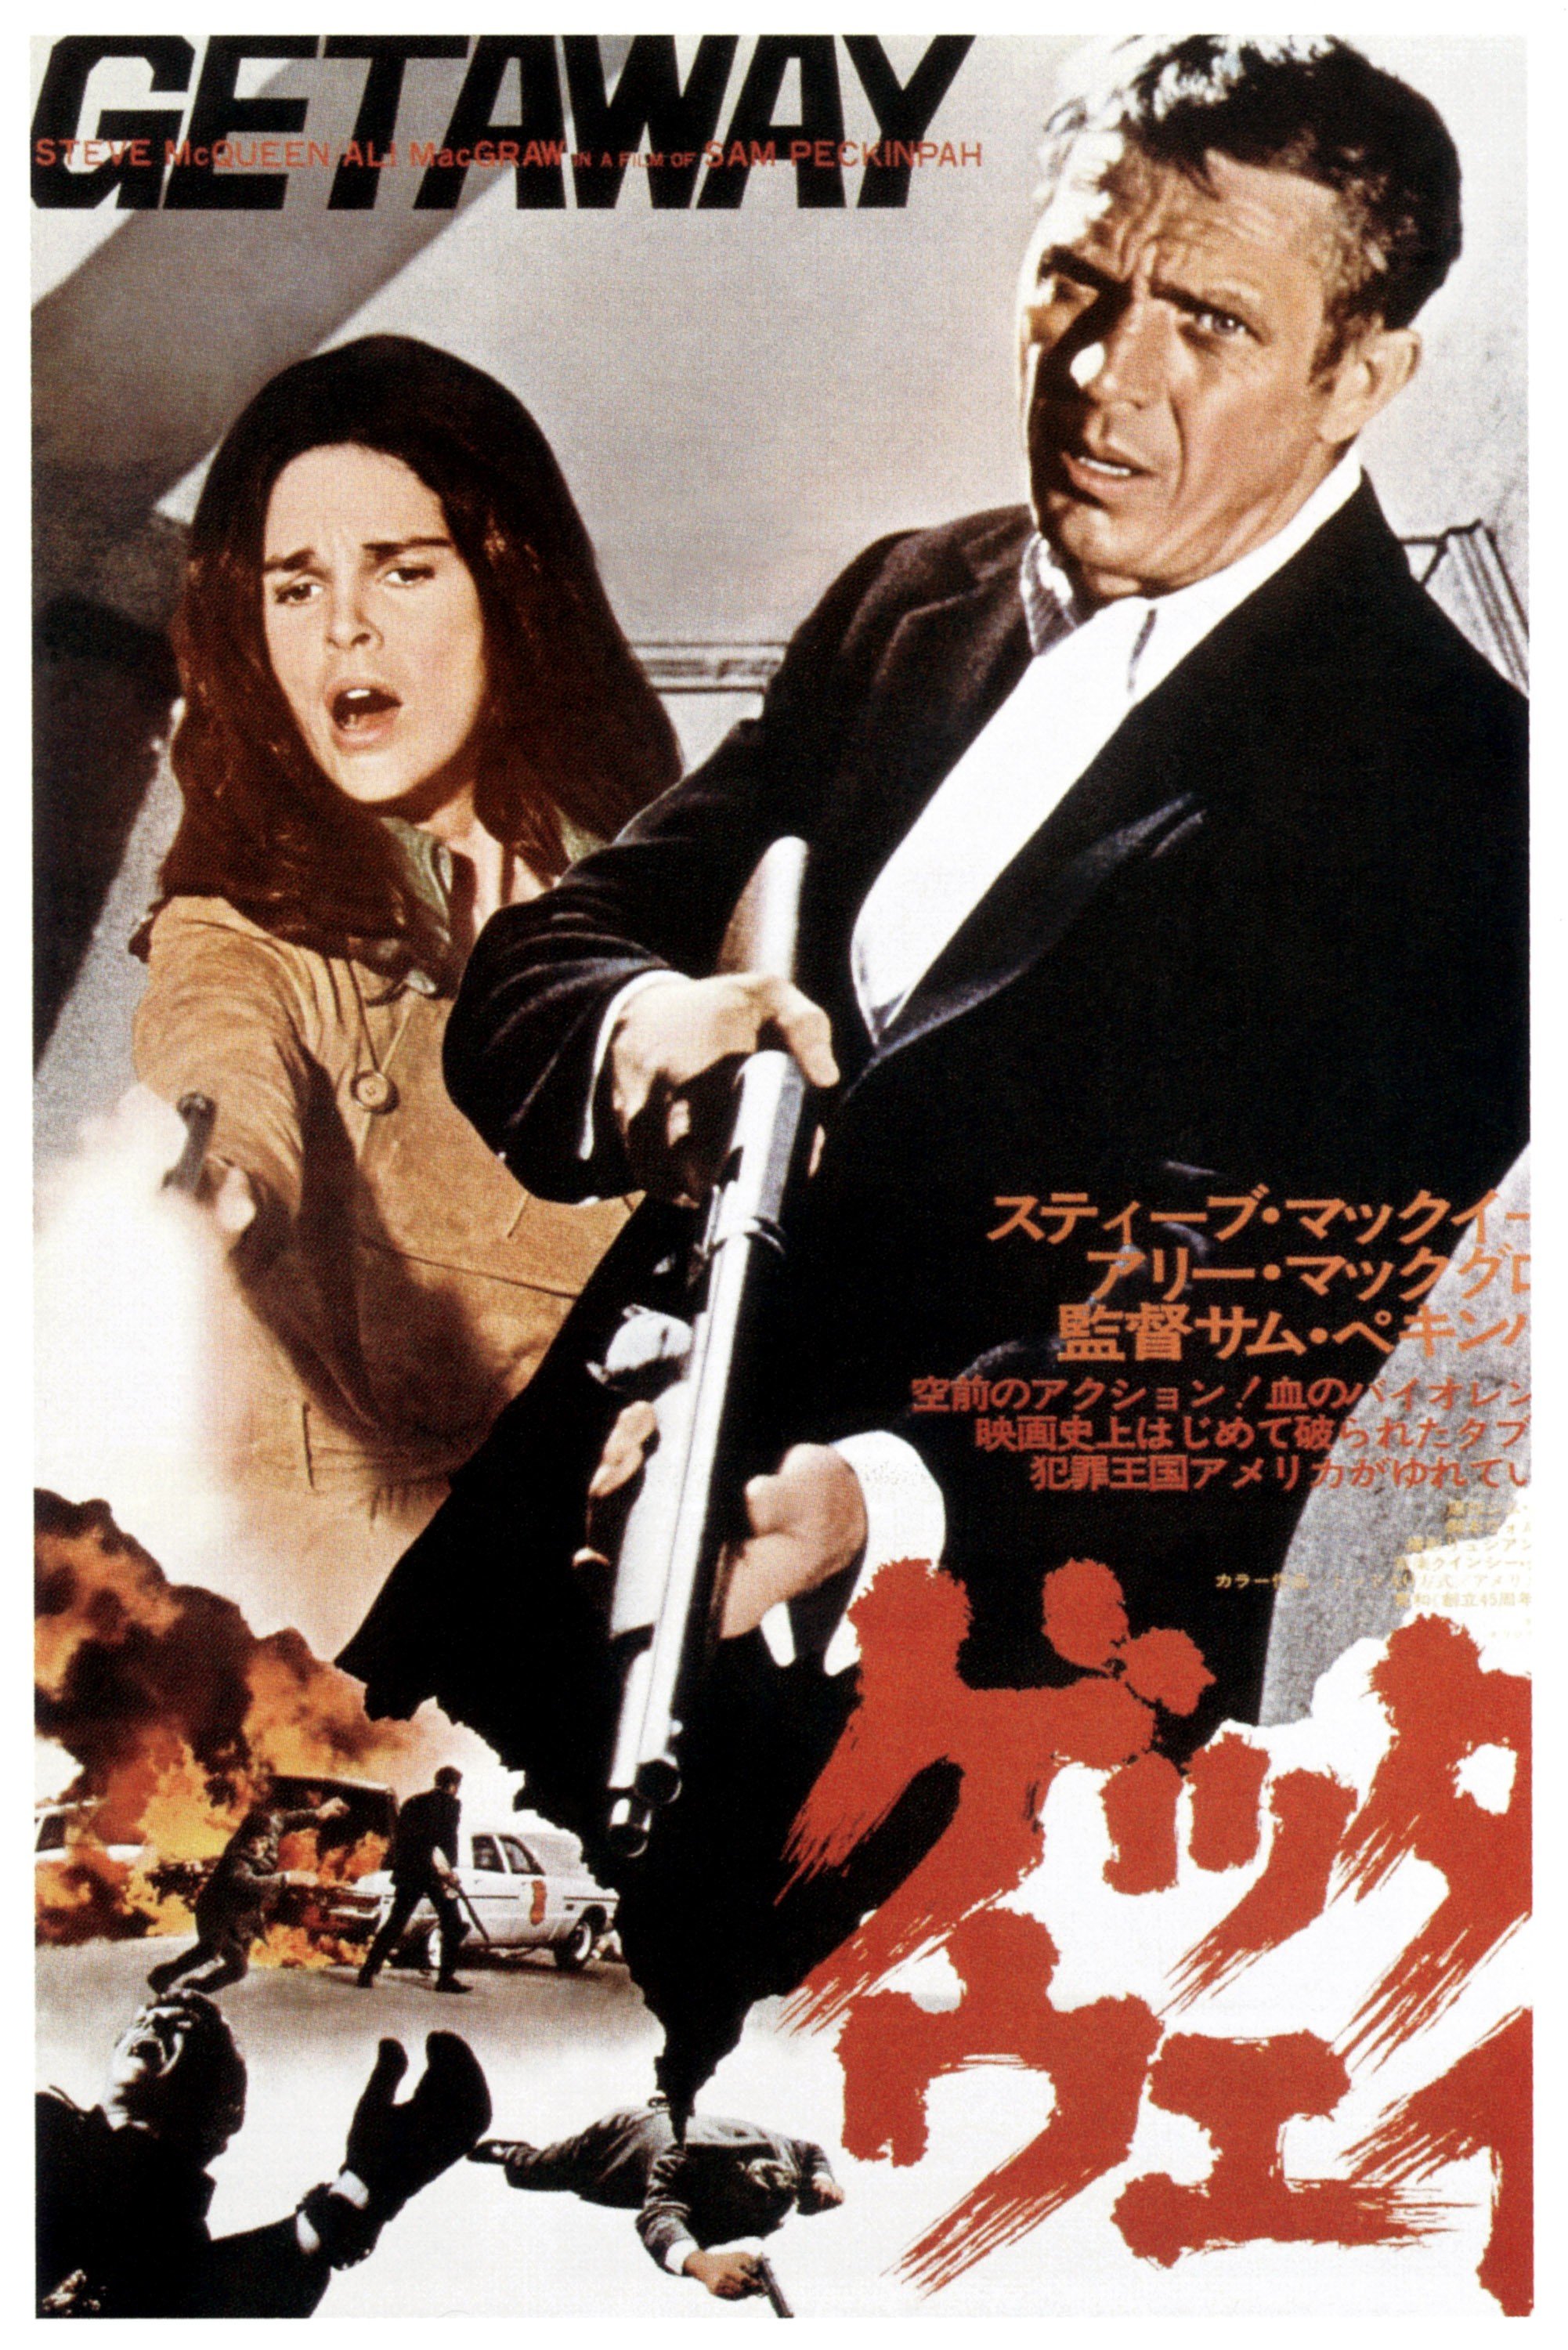 Ali MacGraw and Steve McQueen on a Japanese poster art for "The Getaway," circa 1972. | Source: LMPC/Getty Images